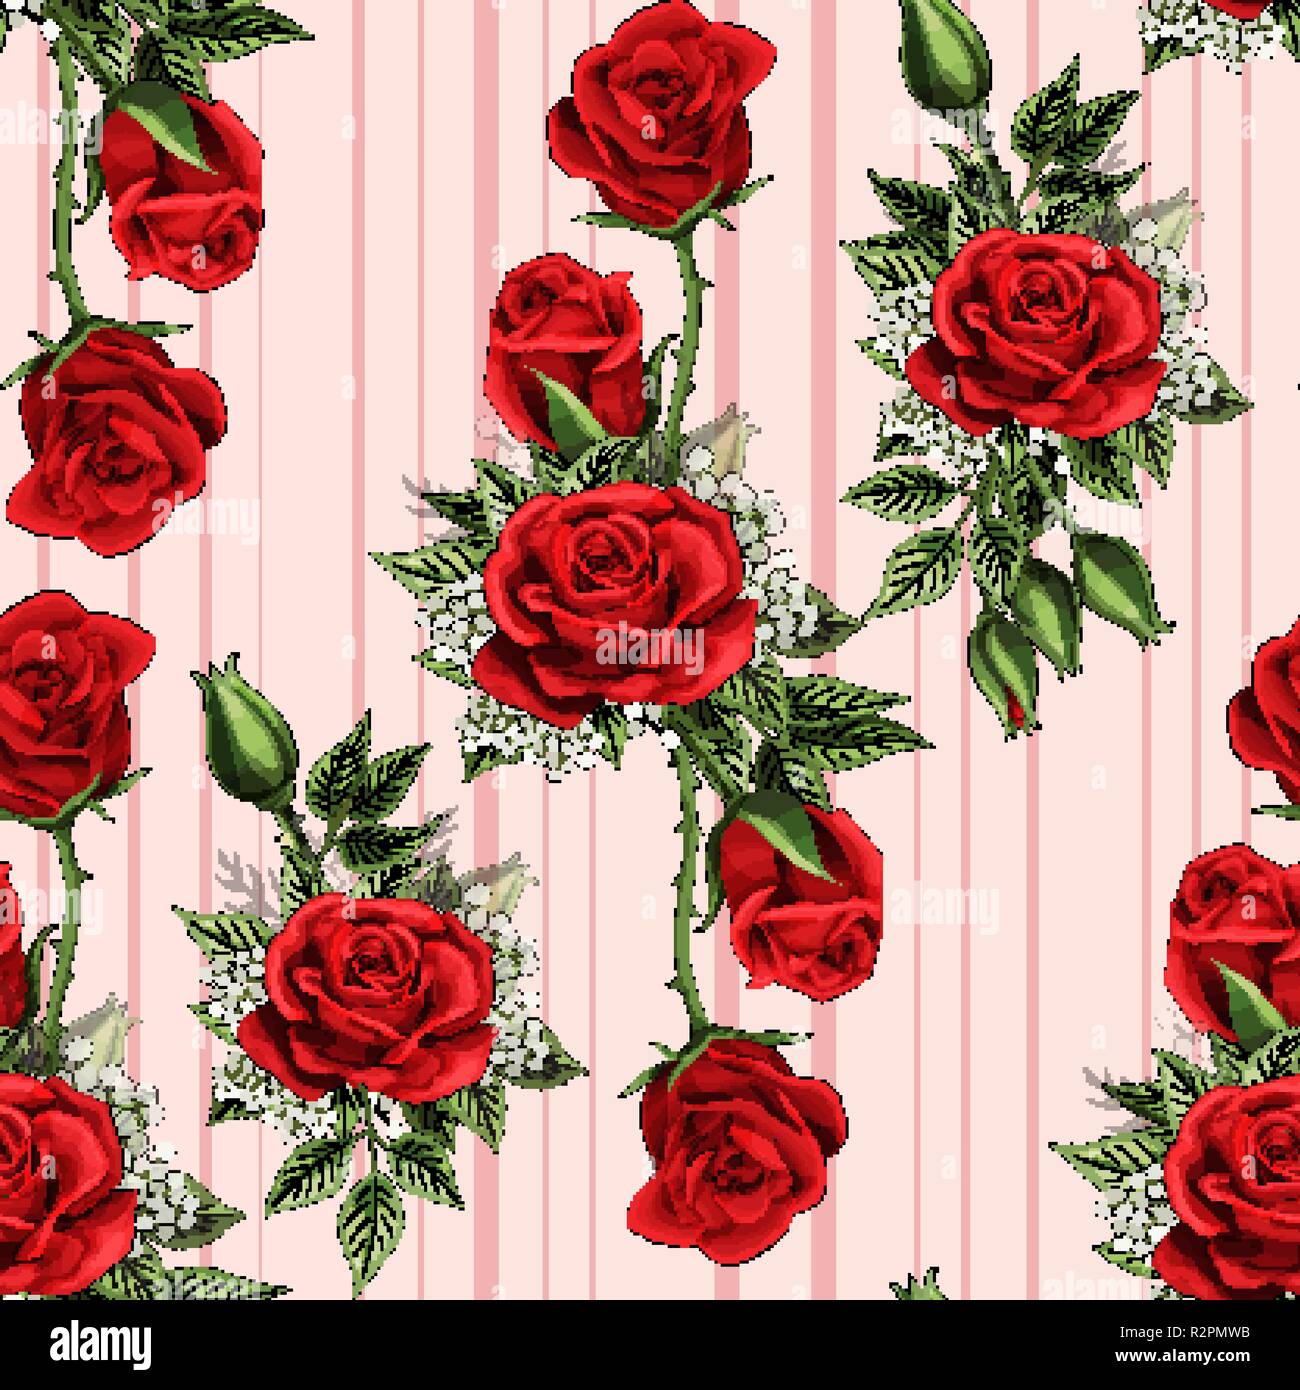 Red Rose Flower Bouquet Spreads Creeper Elements Seamless Pattern